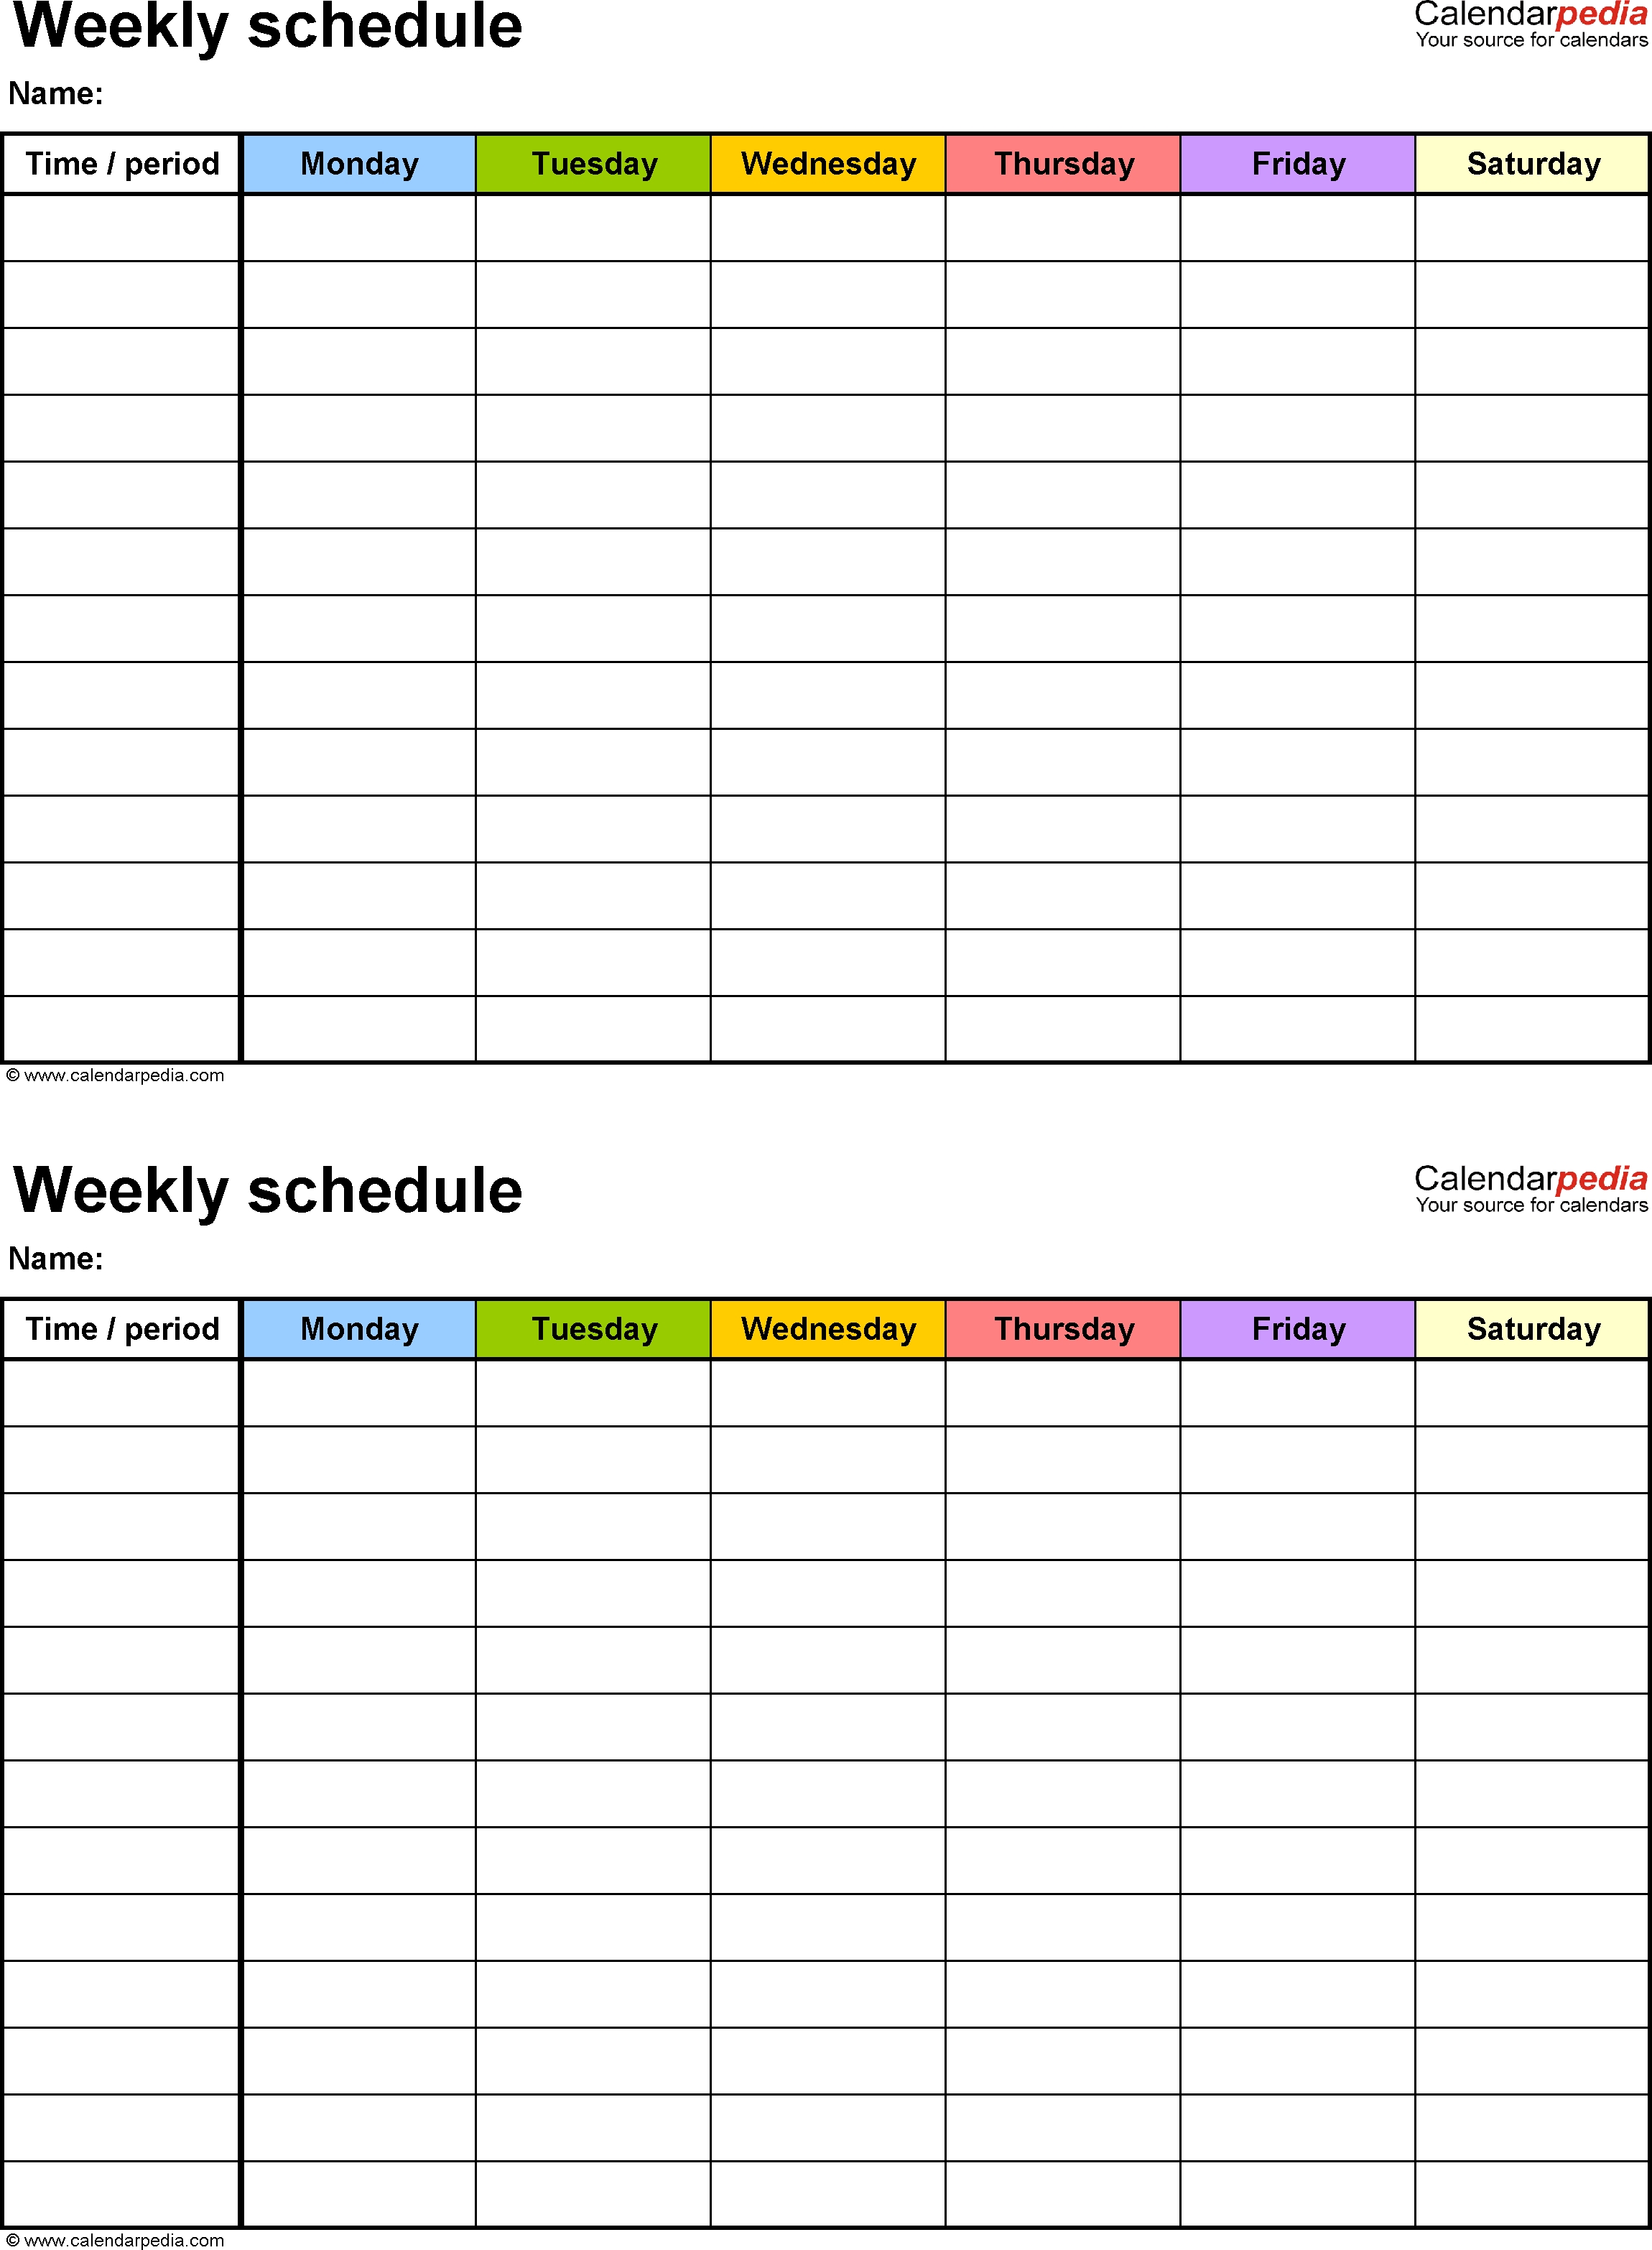 Free Weekly Schedule Templates For Word - 18 Templates within Free Printable Blank Weekly Schedule